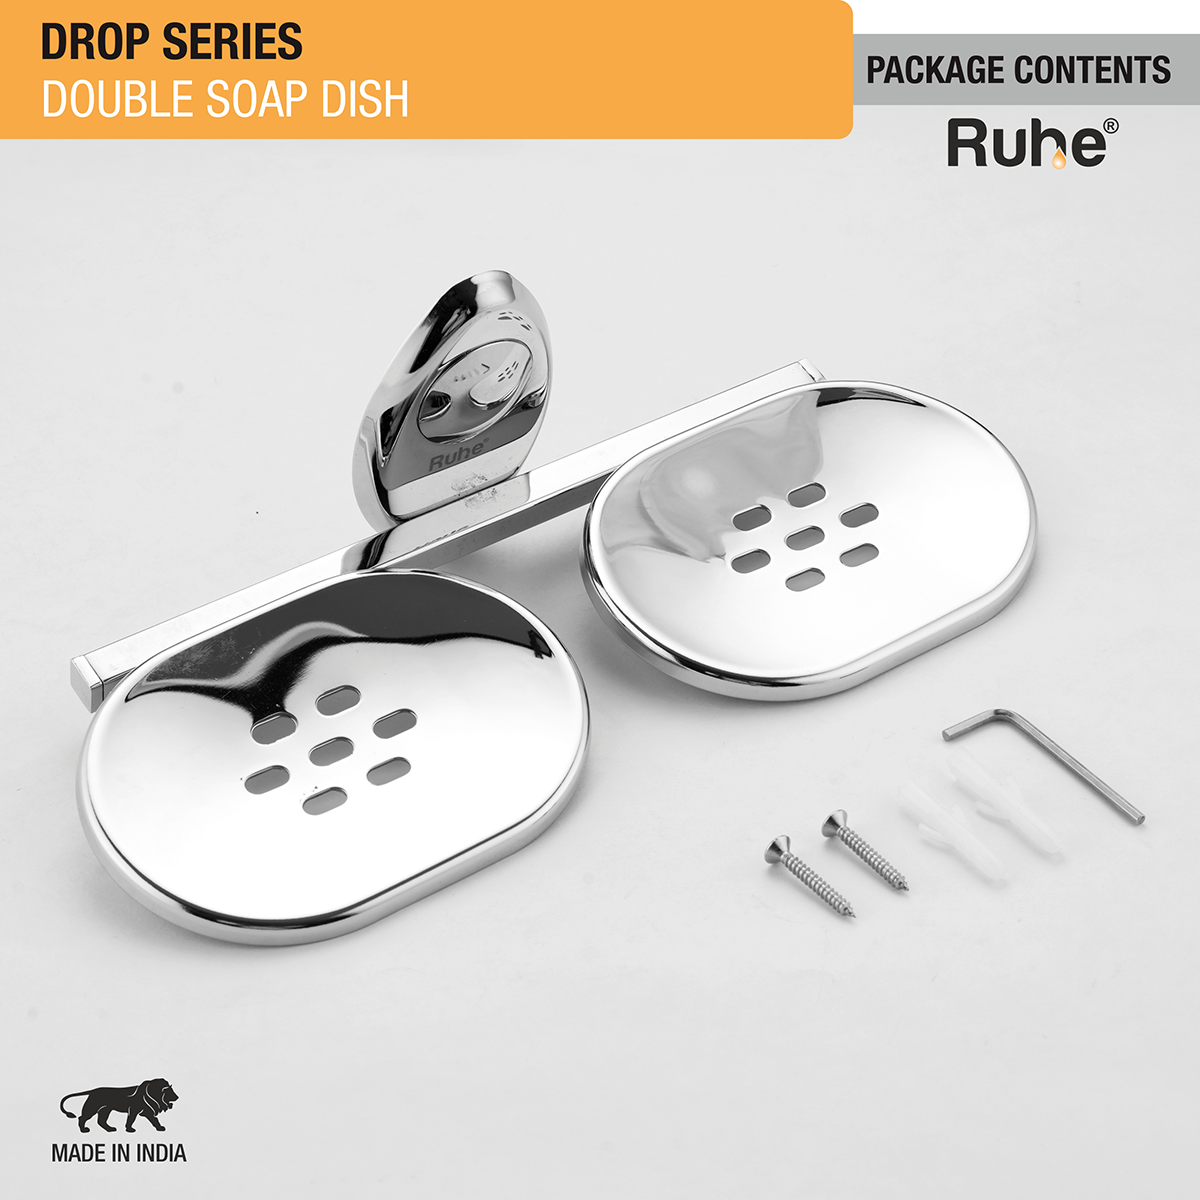 Drop Stainless Steel Double Soap Dish package content